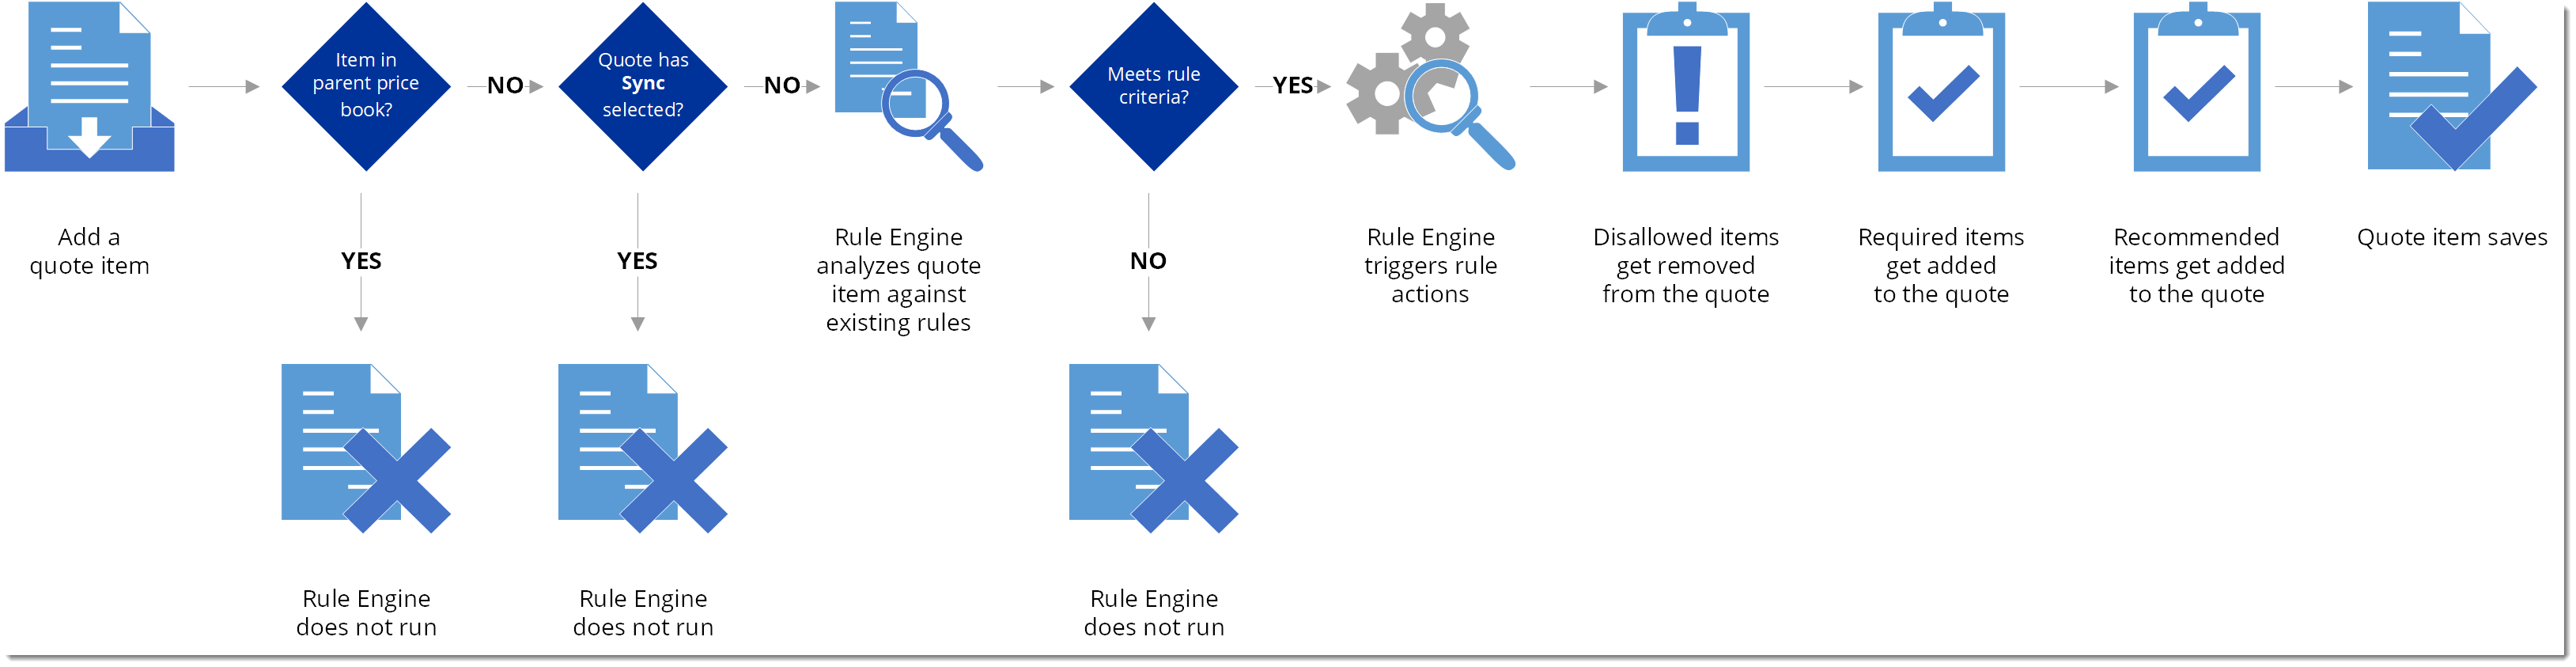 Graphic showing the rule engine process when adding a quote item in FieldFX Back Office